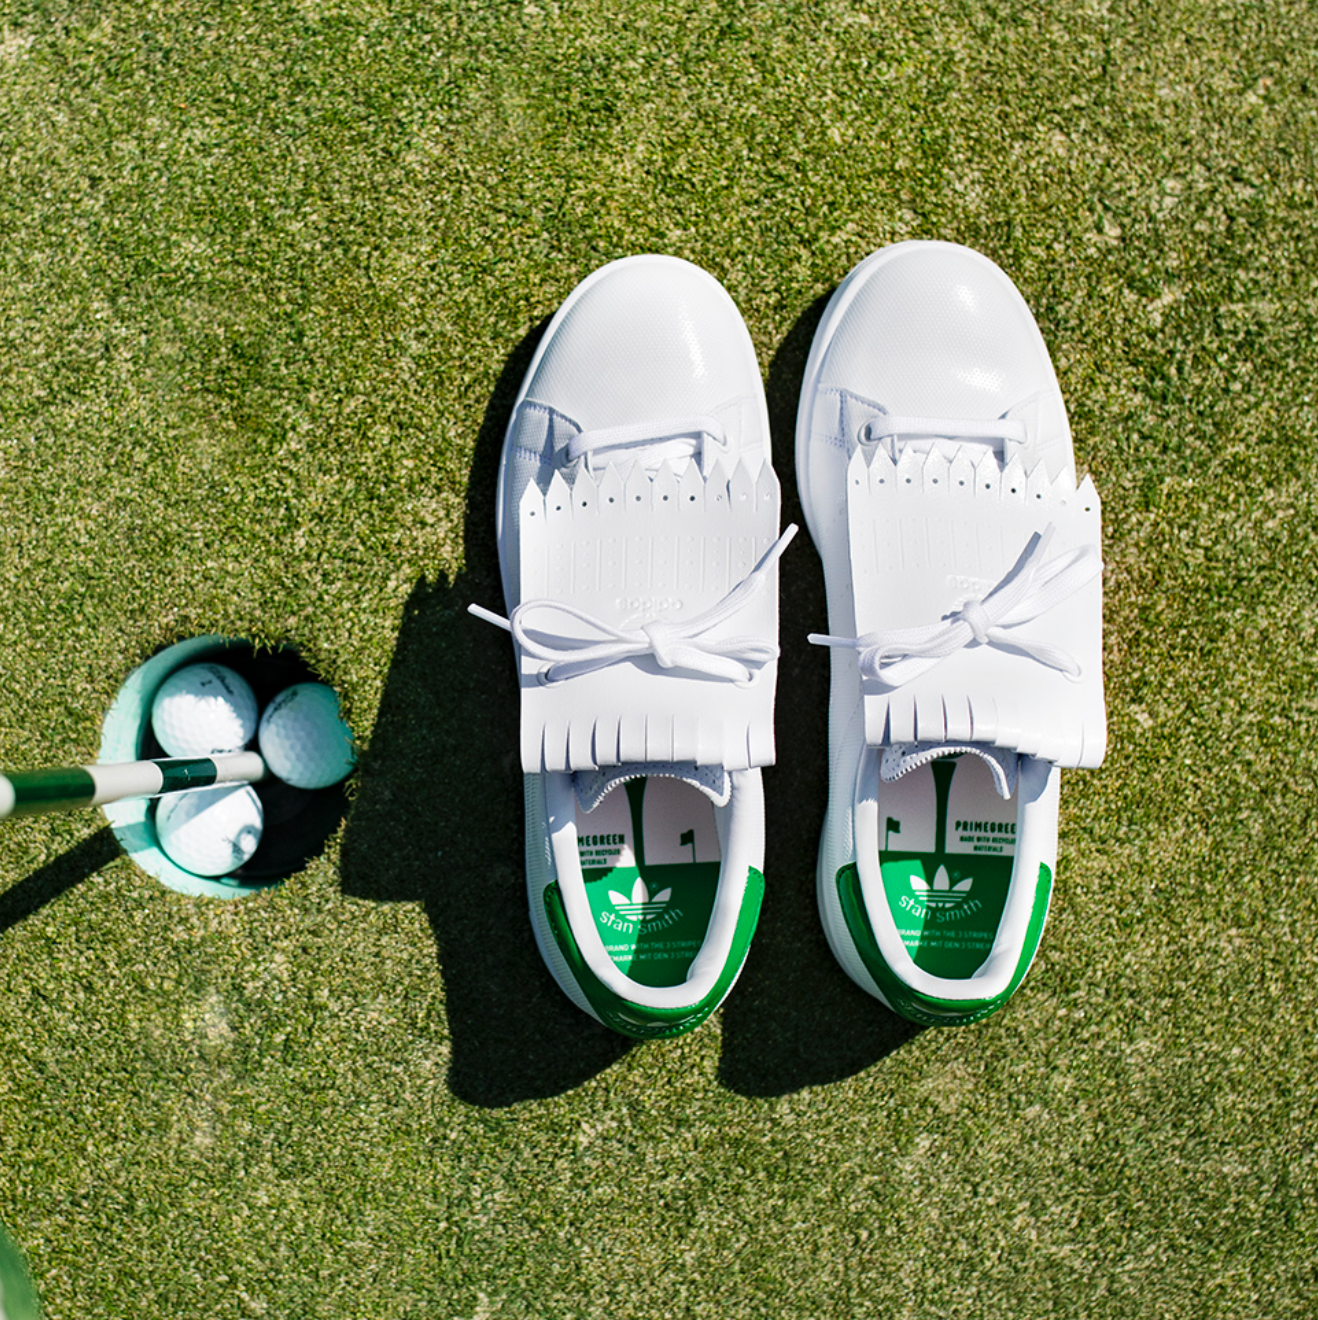 The Classic Adidas Stan Smith Gets Its On-course Debut article image